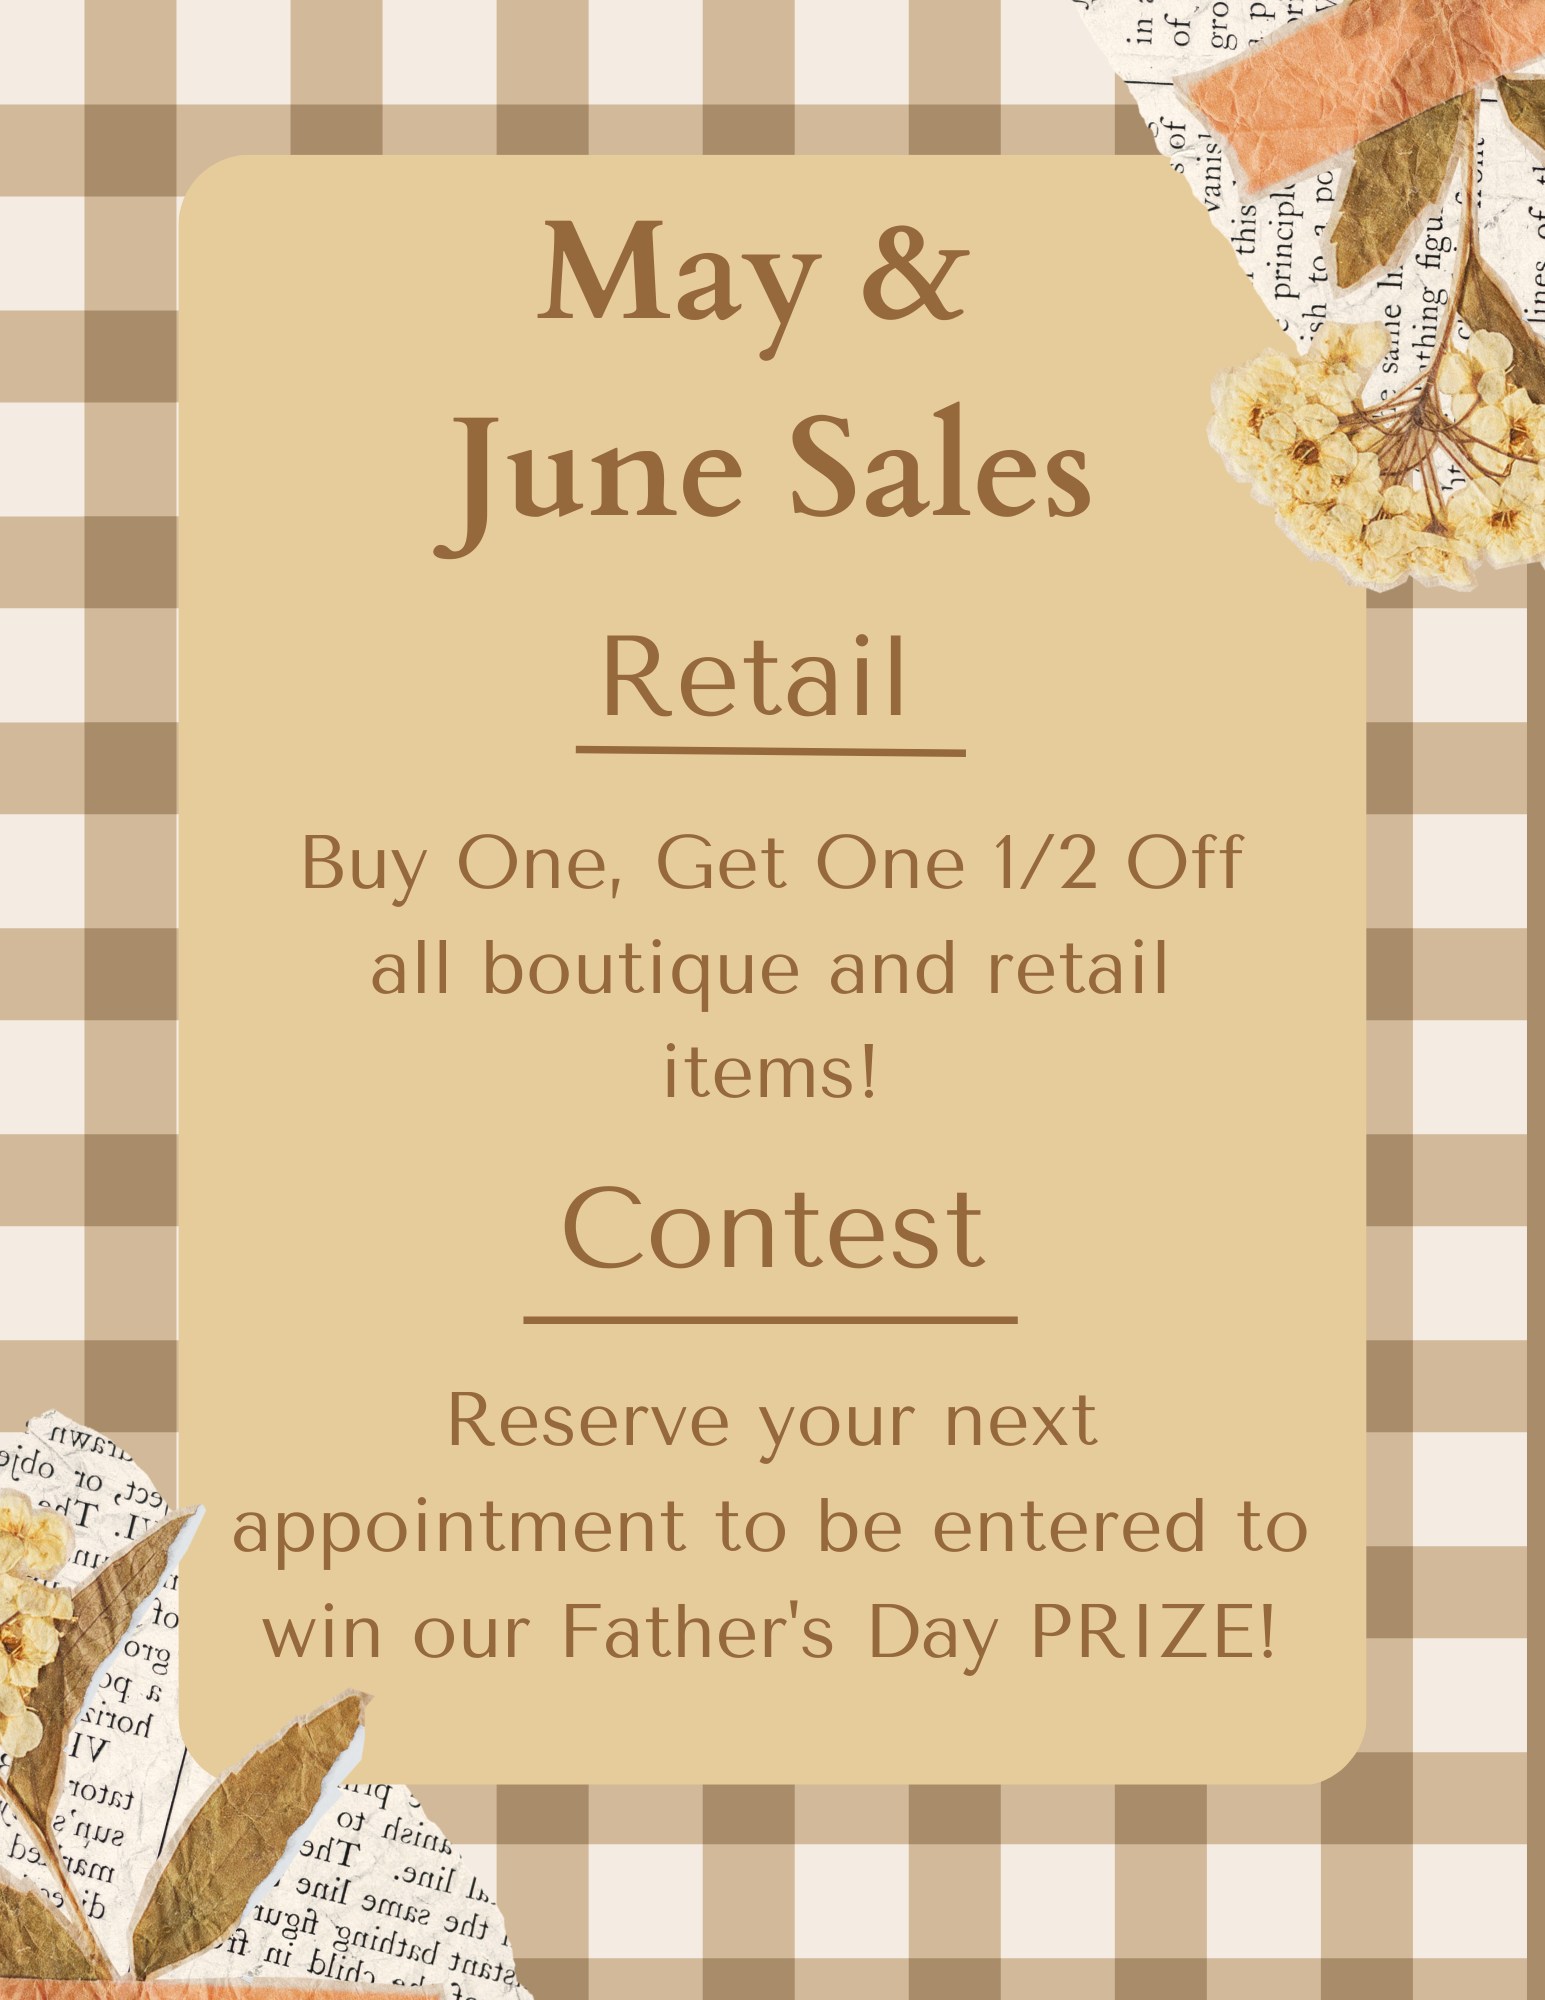 May and June Sales Flier (UNCOMPLETED).png